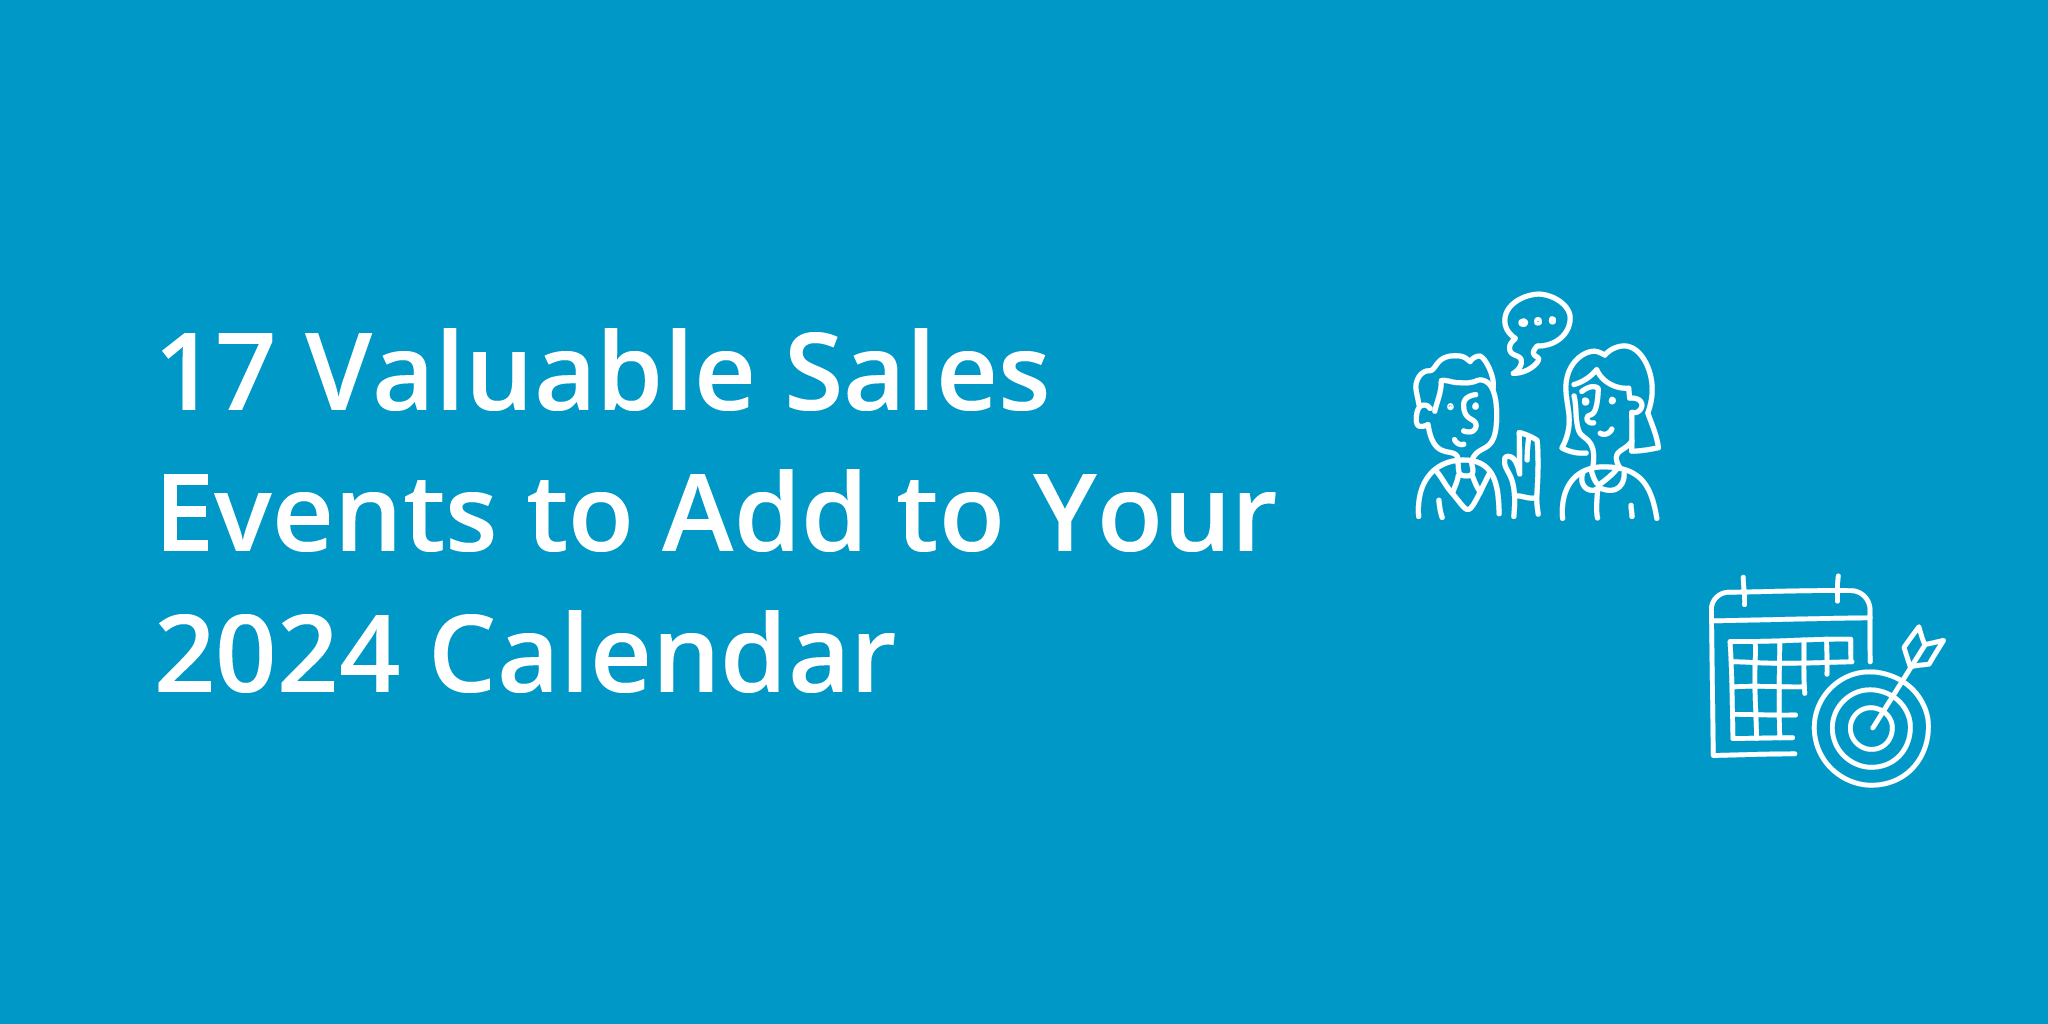 17 Valuable Sales Events to Add to Your 2024 Calendar